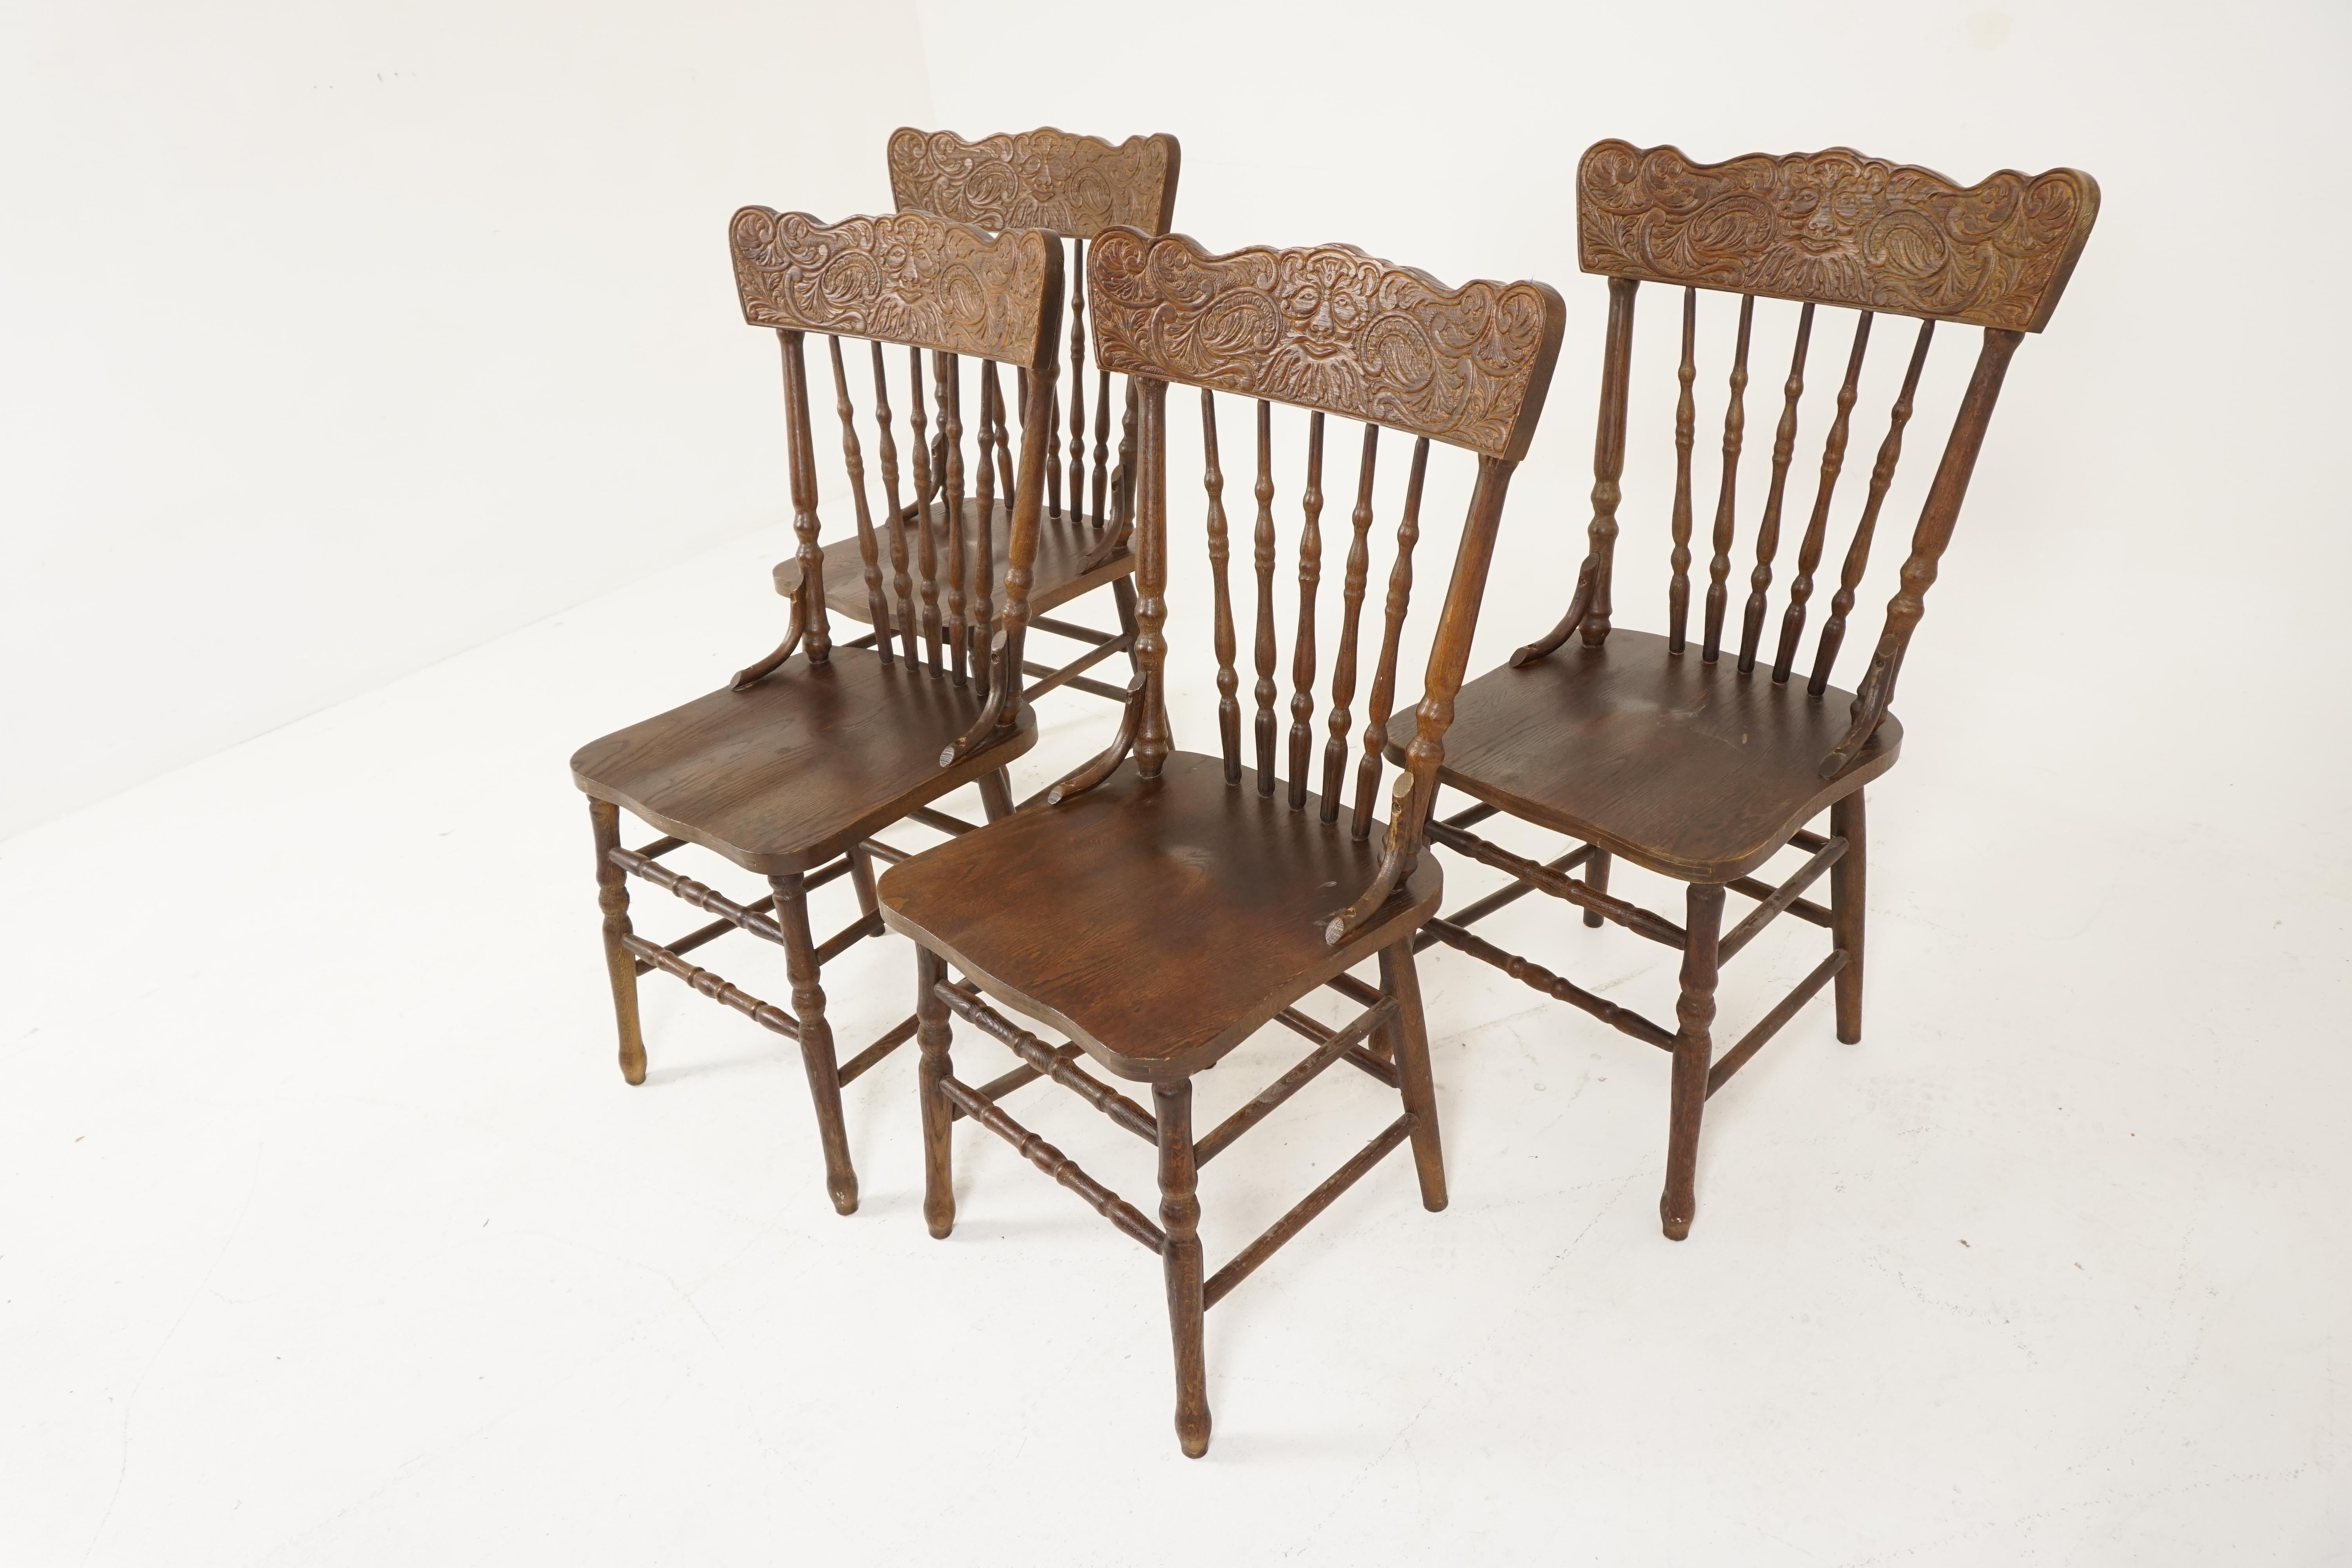 Vintage dining chairs, set of 4, Oak, Press Back, Canada 1950, B2795

Canada 1950
Solid oak
Original finish
Carved top rail
Five turned spindles underneath
Solid oak seat
Standing on four turned legs
Double turned stretchers
All joints are